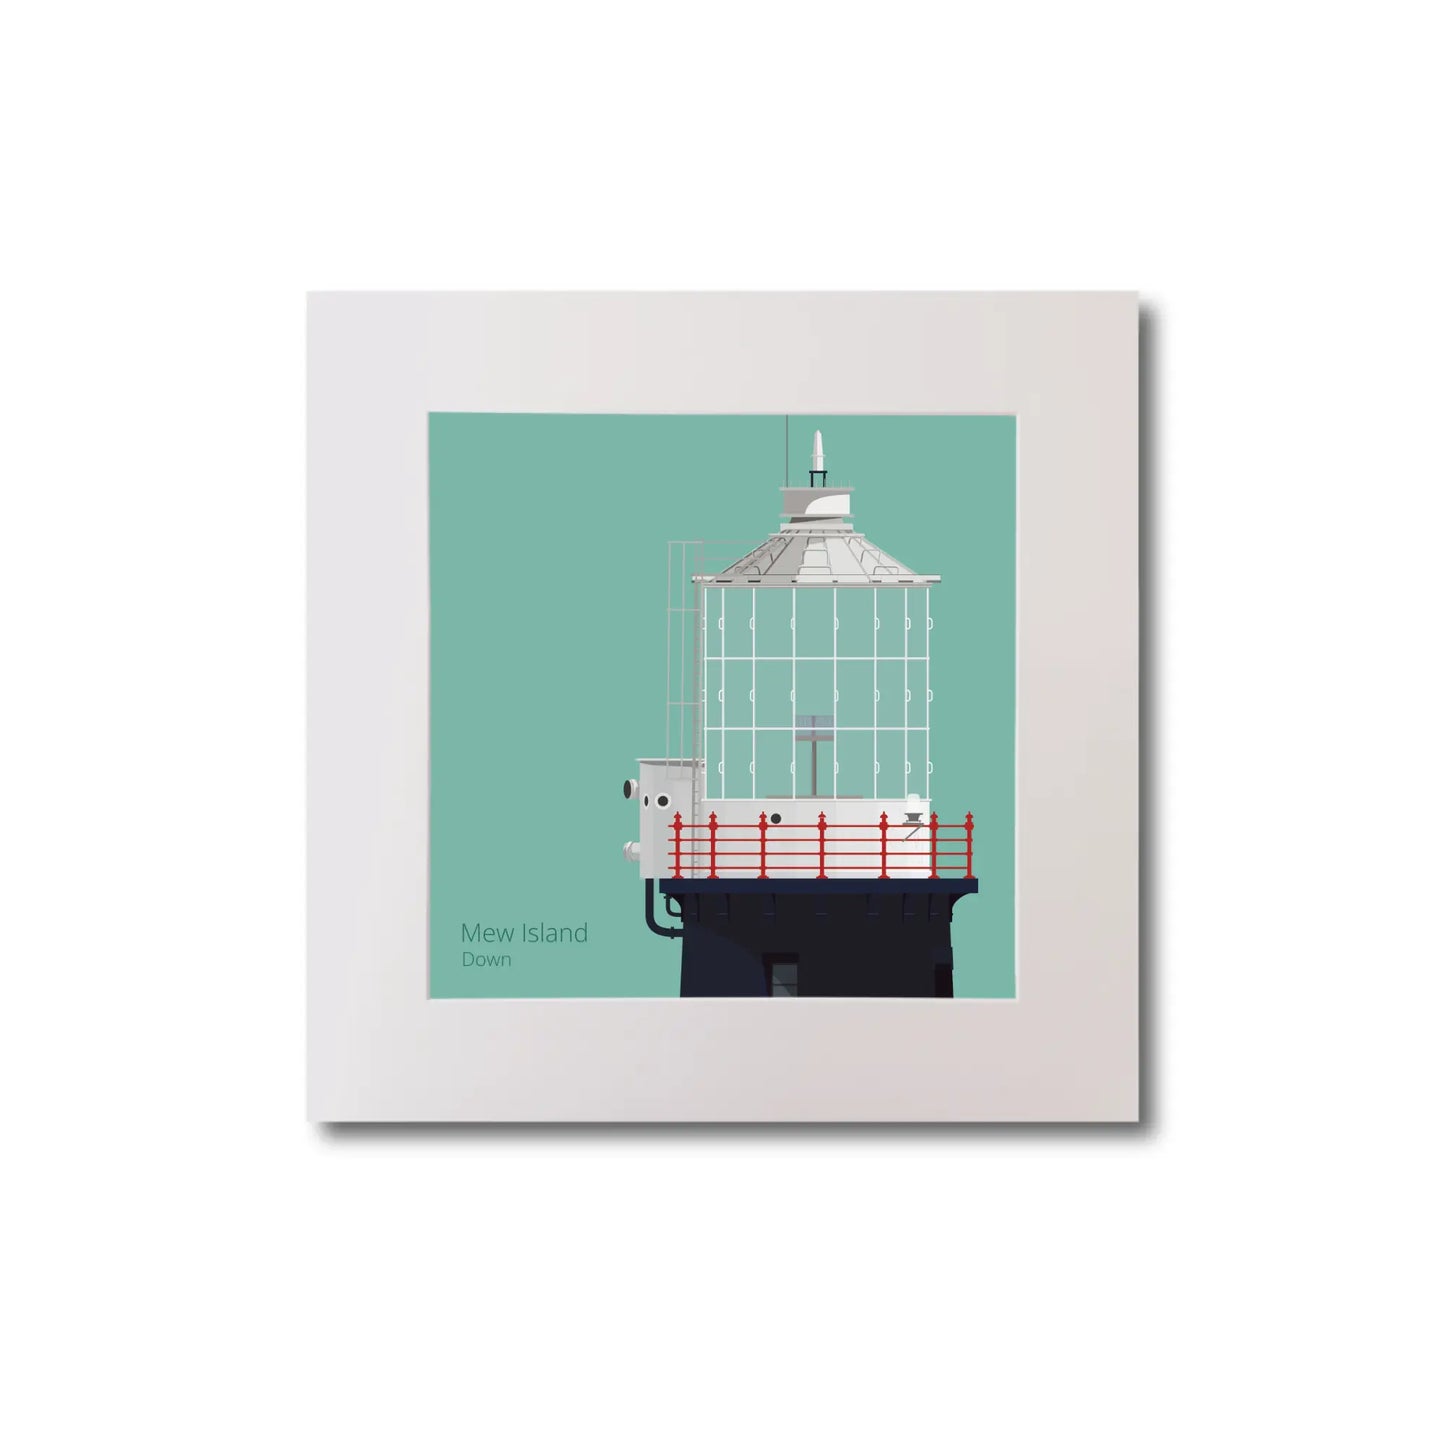 Illustration Mew Island lighthouse on an ocean green background, mounted and measuring 20x20cm.